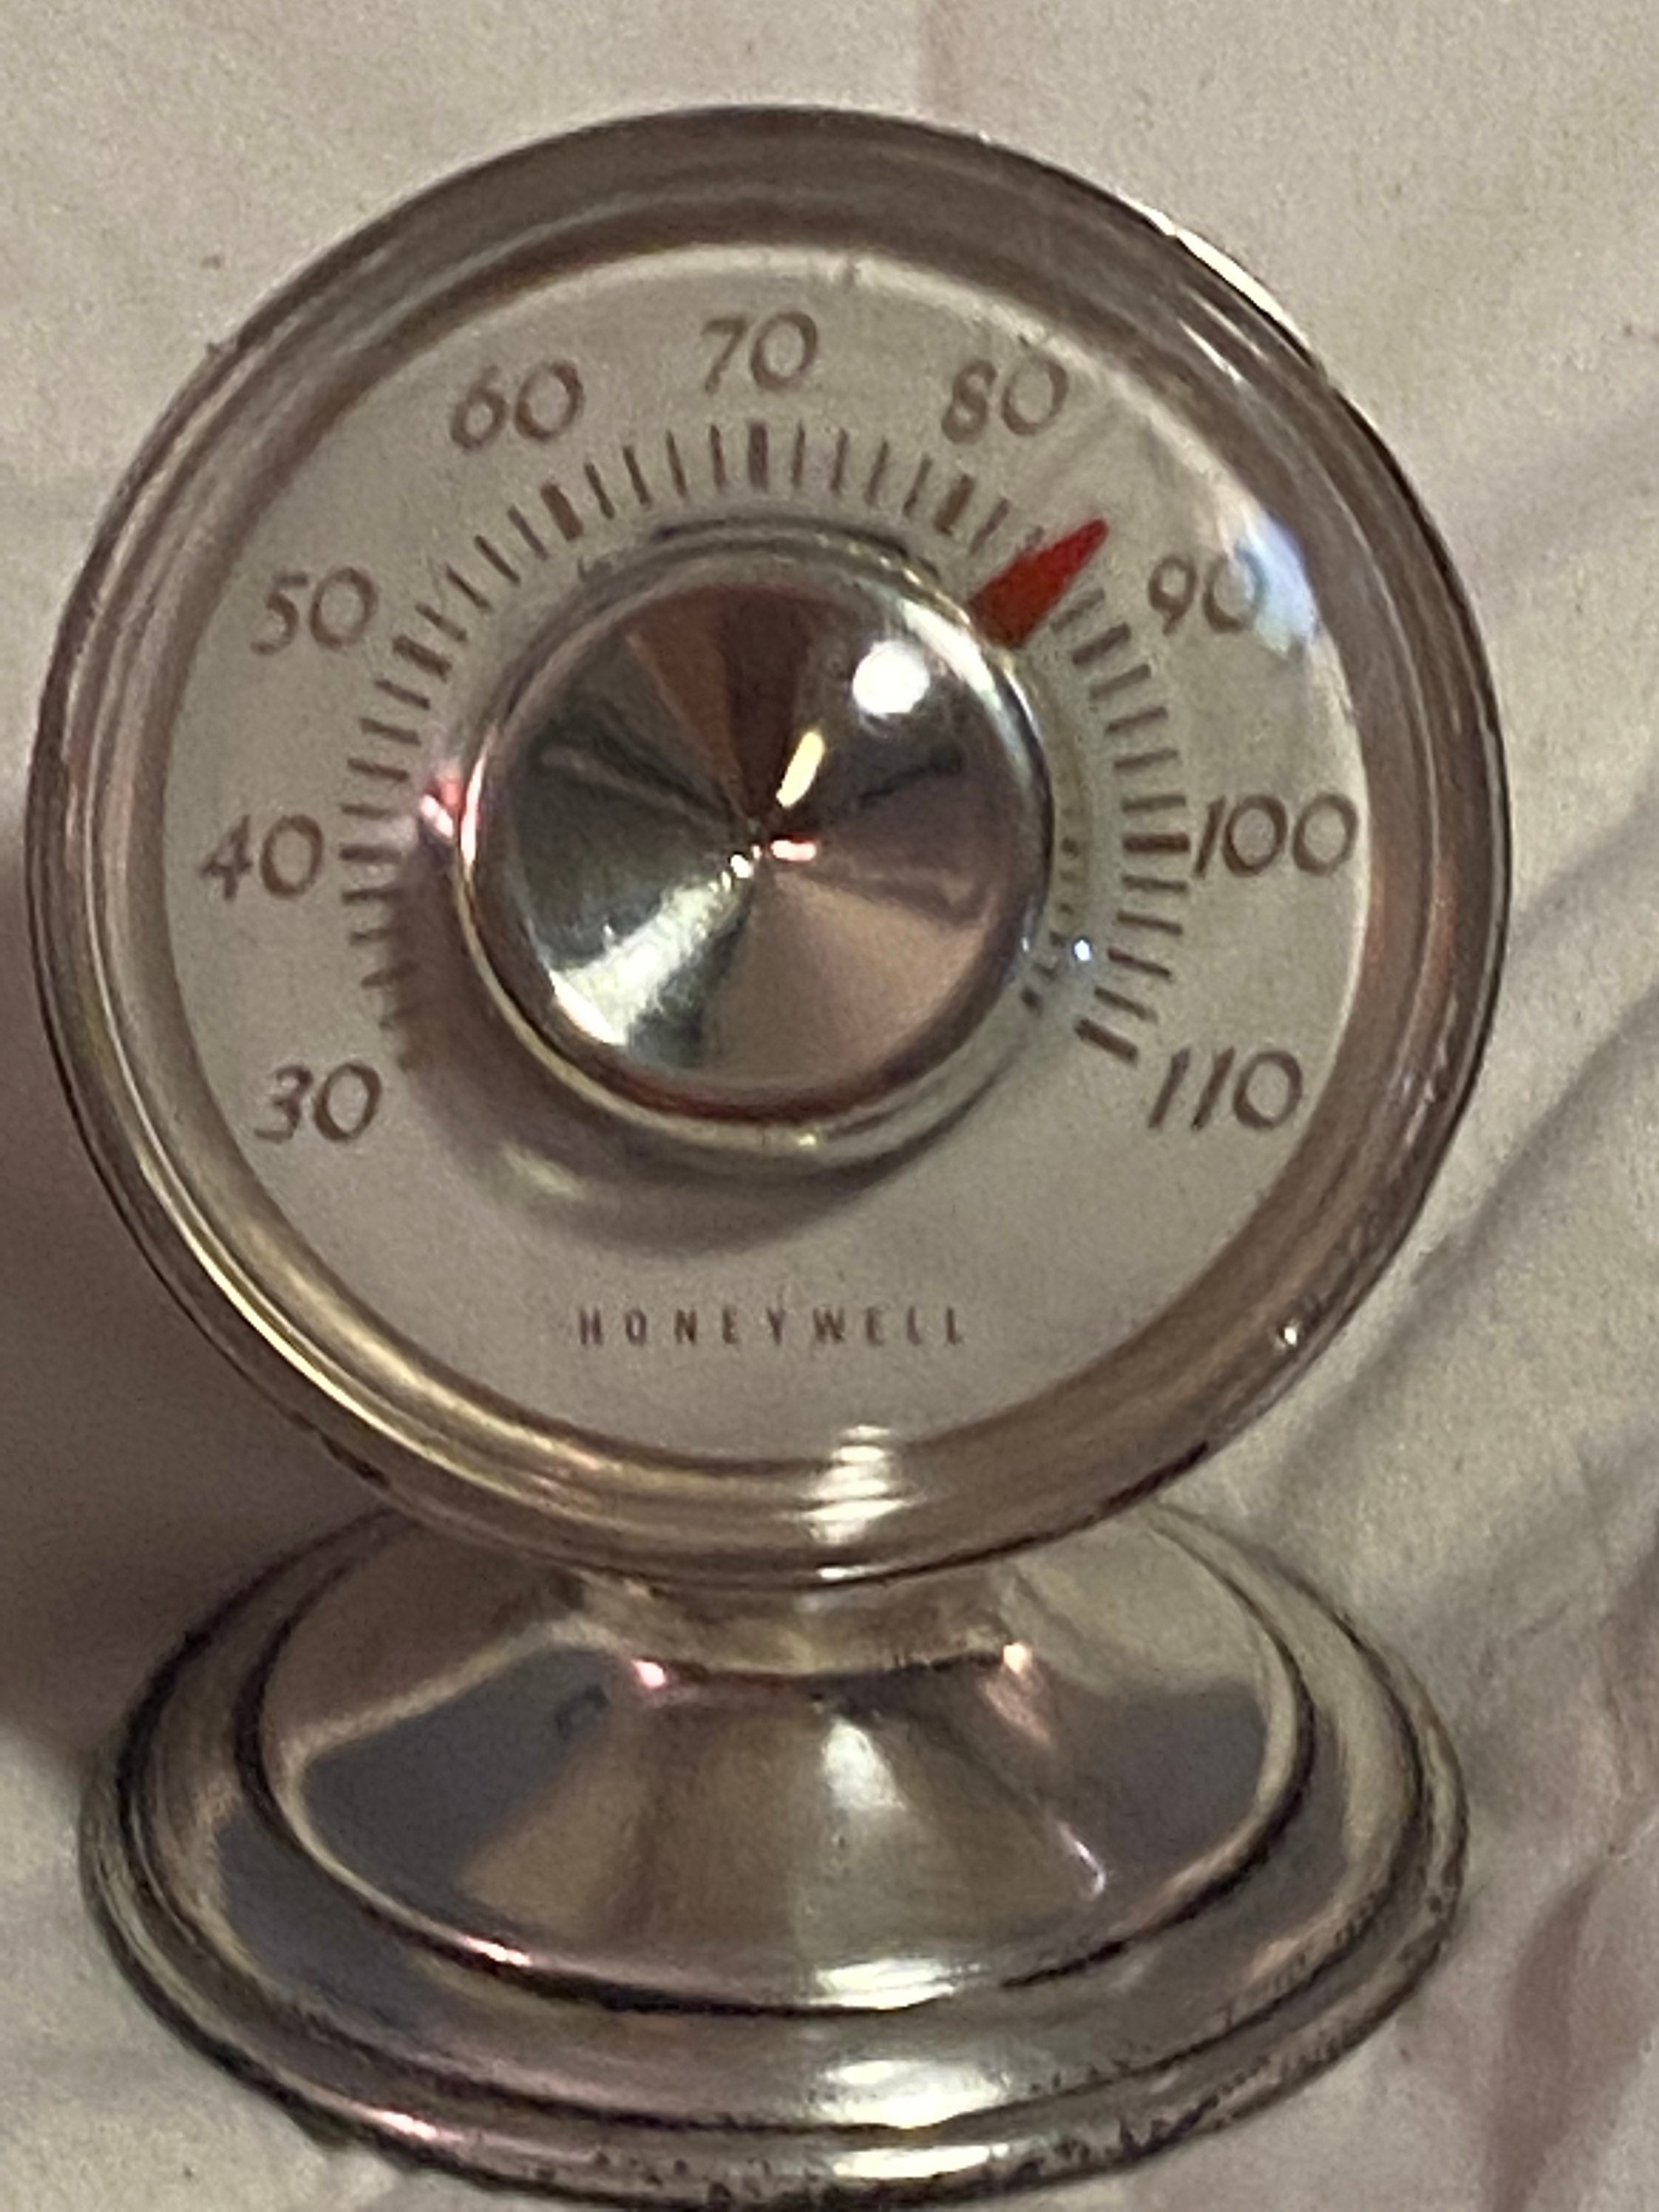 United Airlines Desk Thermometer by Honeywell - Vintage